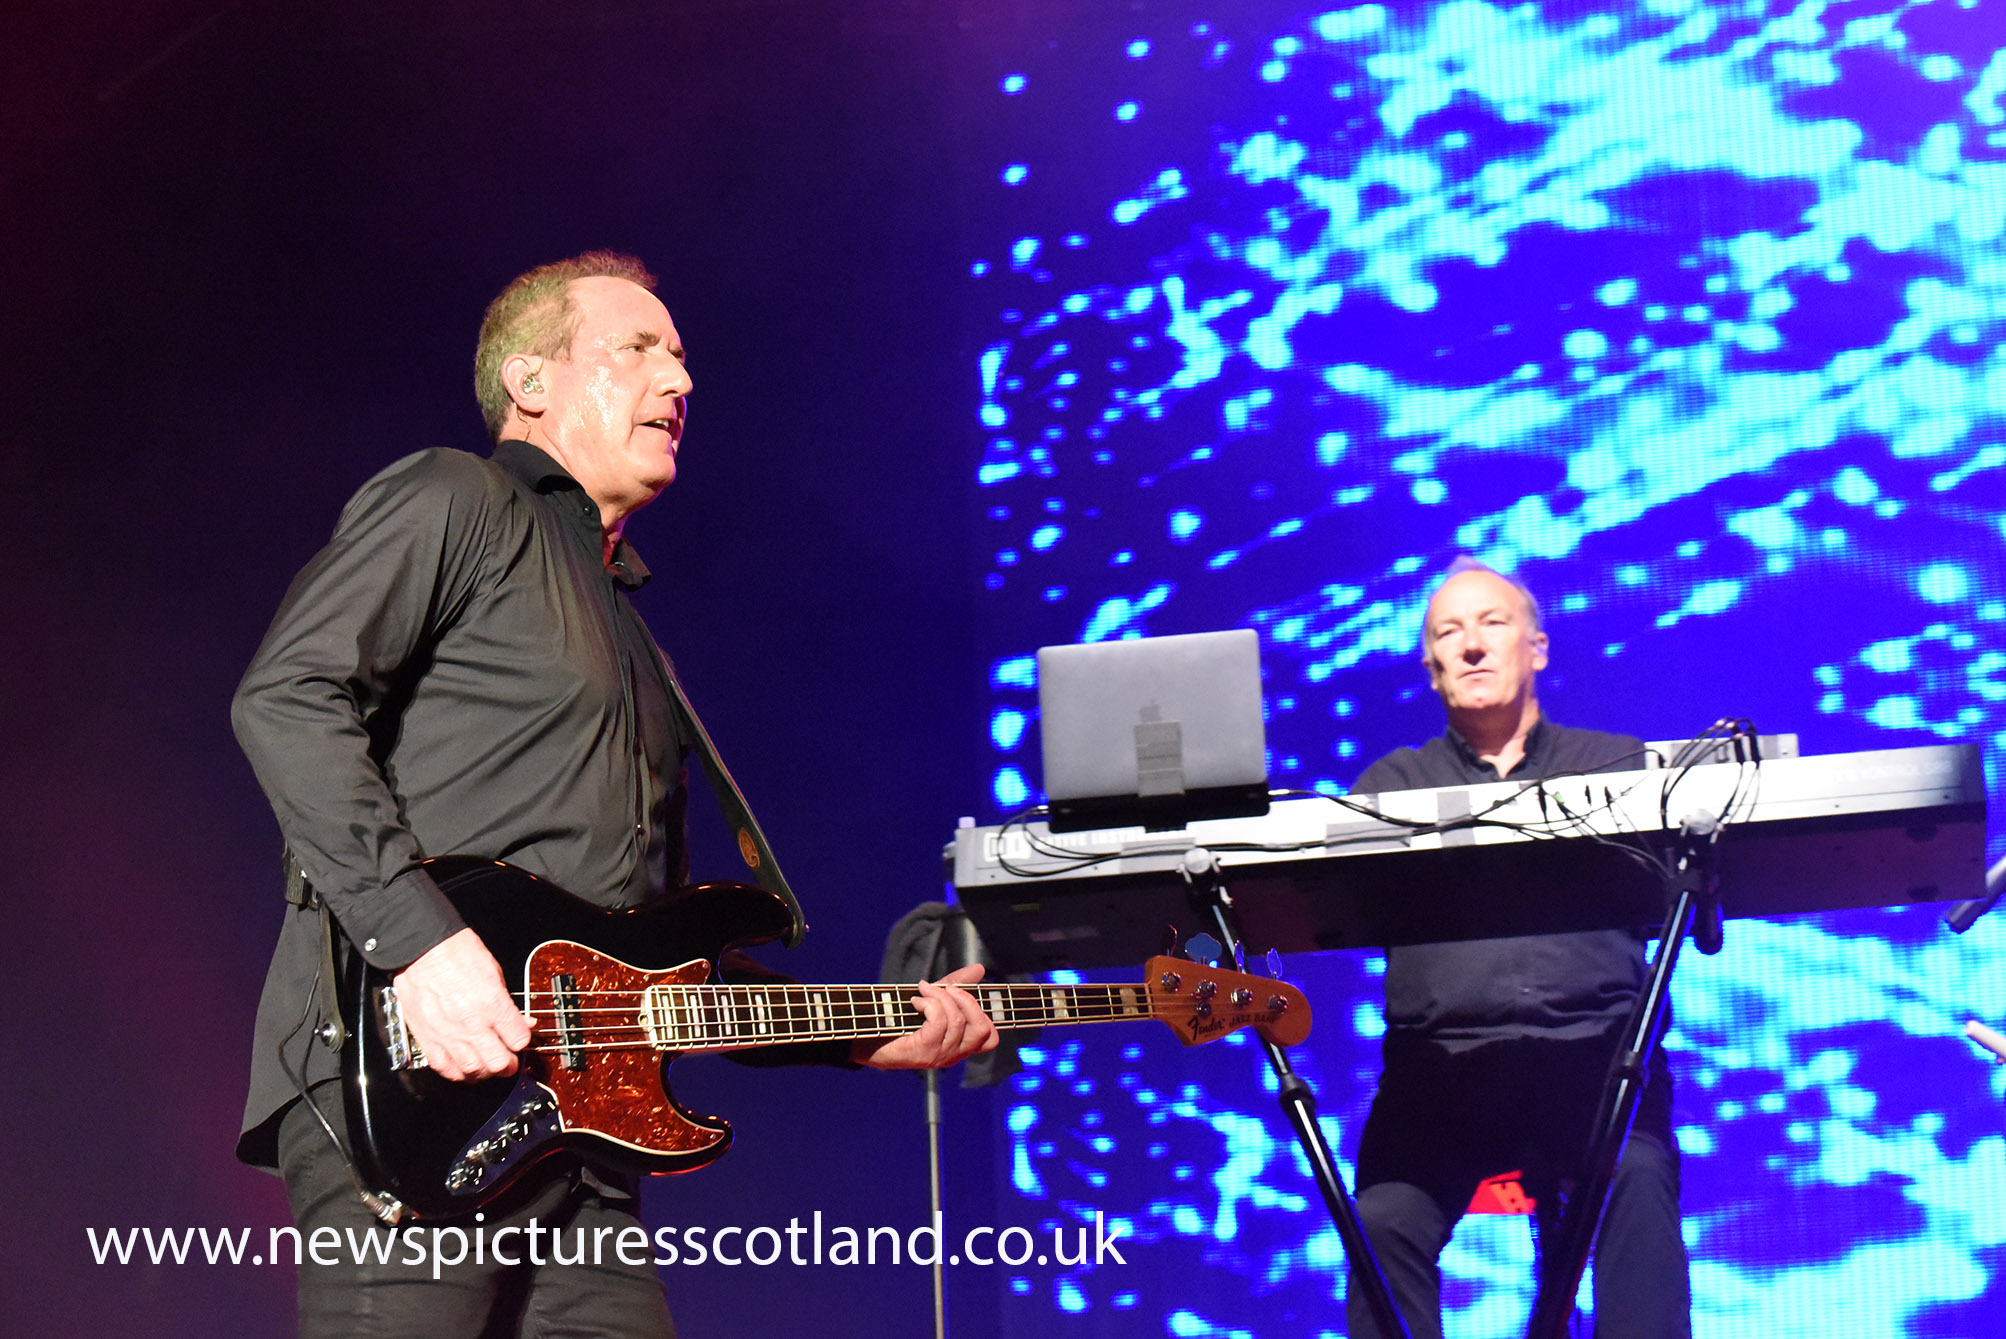 The group consists of co-founders Andy McCluskey (vocals, bass guitar) and Paul Humphreys (keyboards, vocals)